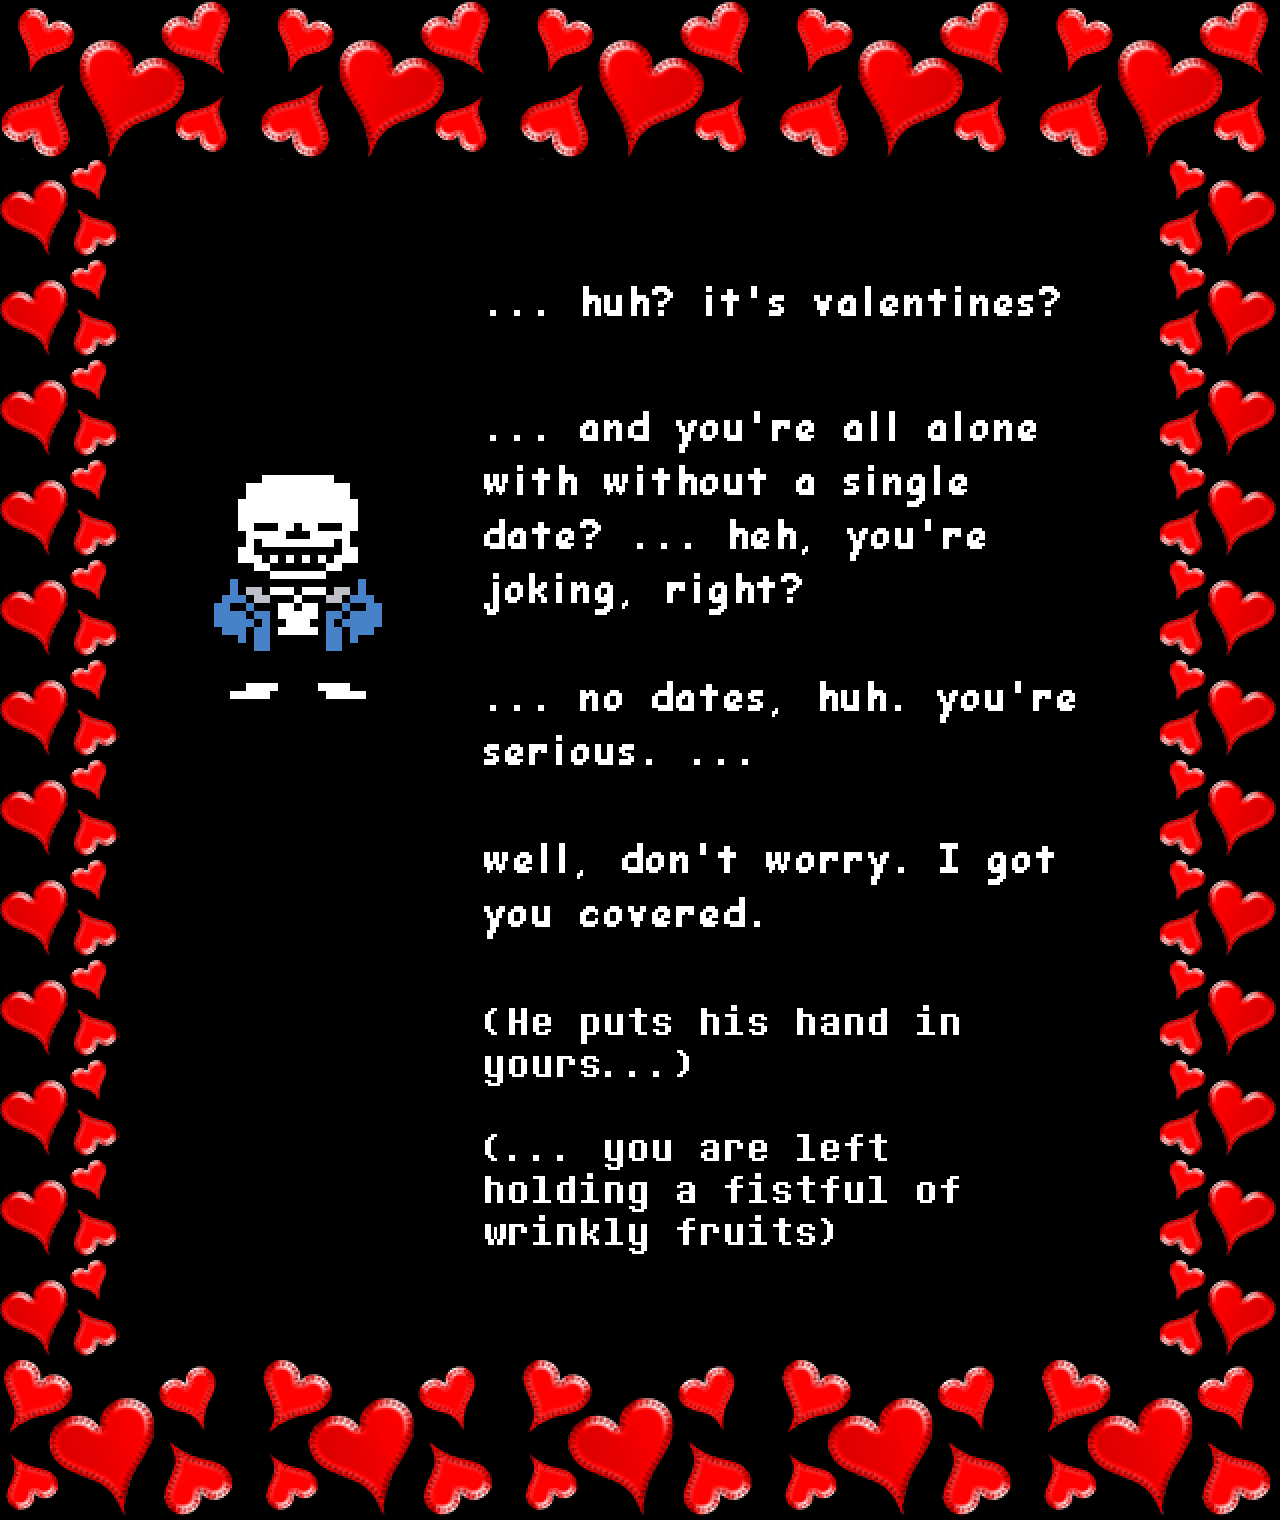 sans: … huh? it’s valentines?

… and you’re all alone with without a single date? … heh, you’re joking, right?

… no dates, huh. you’re serious. …

well, don’t worry. I got you covered.

(He puts his hand in yours…)

(… you are left holding a fistful of wrinkly fruits)